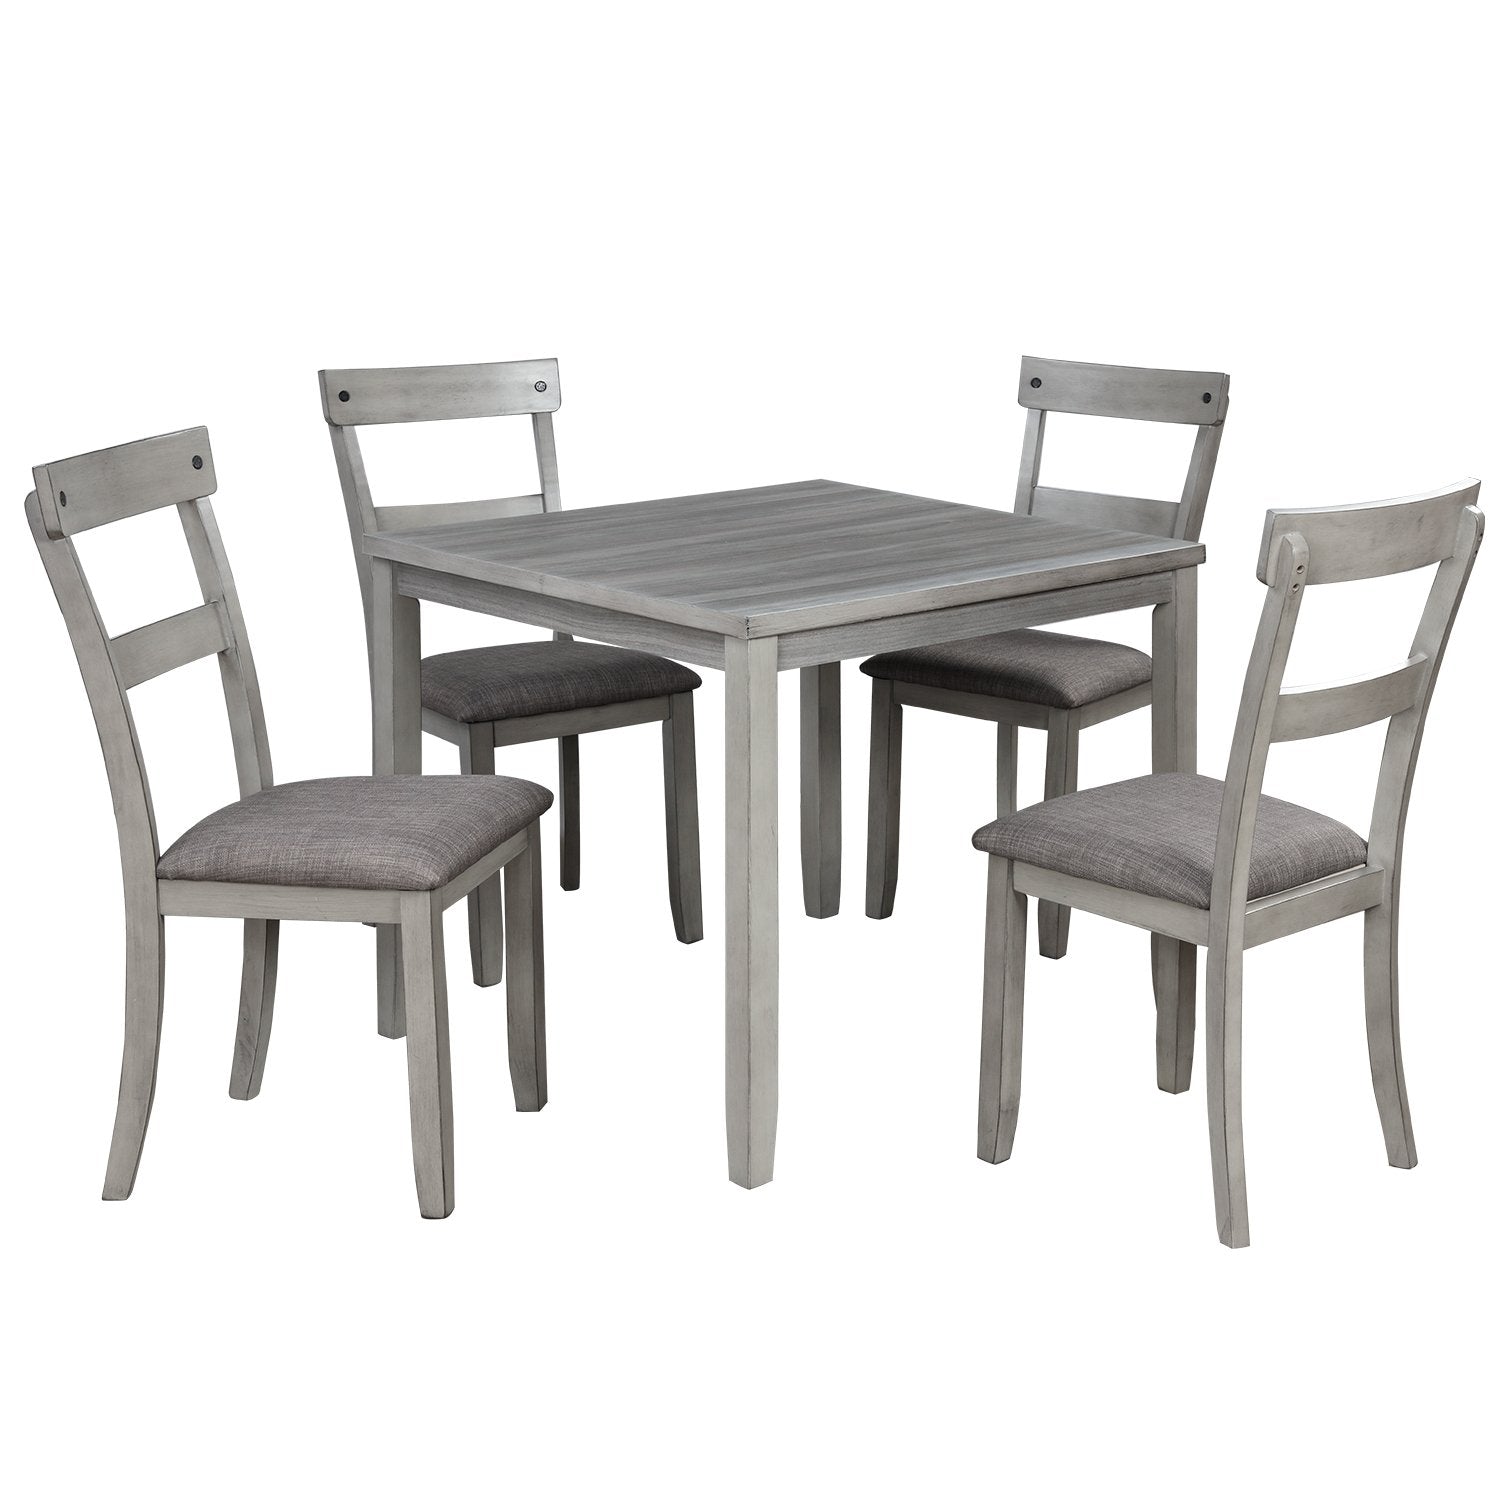 5 Piece Dining Table Set Industrial Wooden Kitchen Table and 4 Chairs for Dining Room (Light Grey)